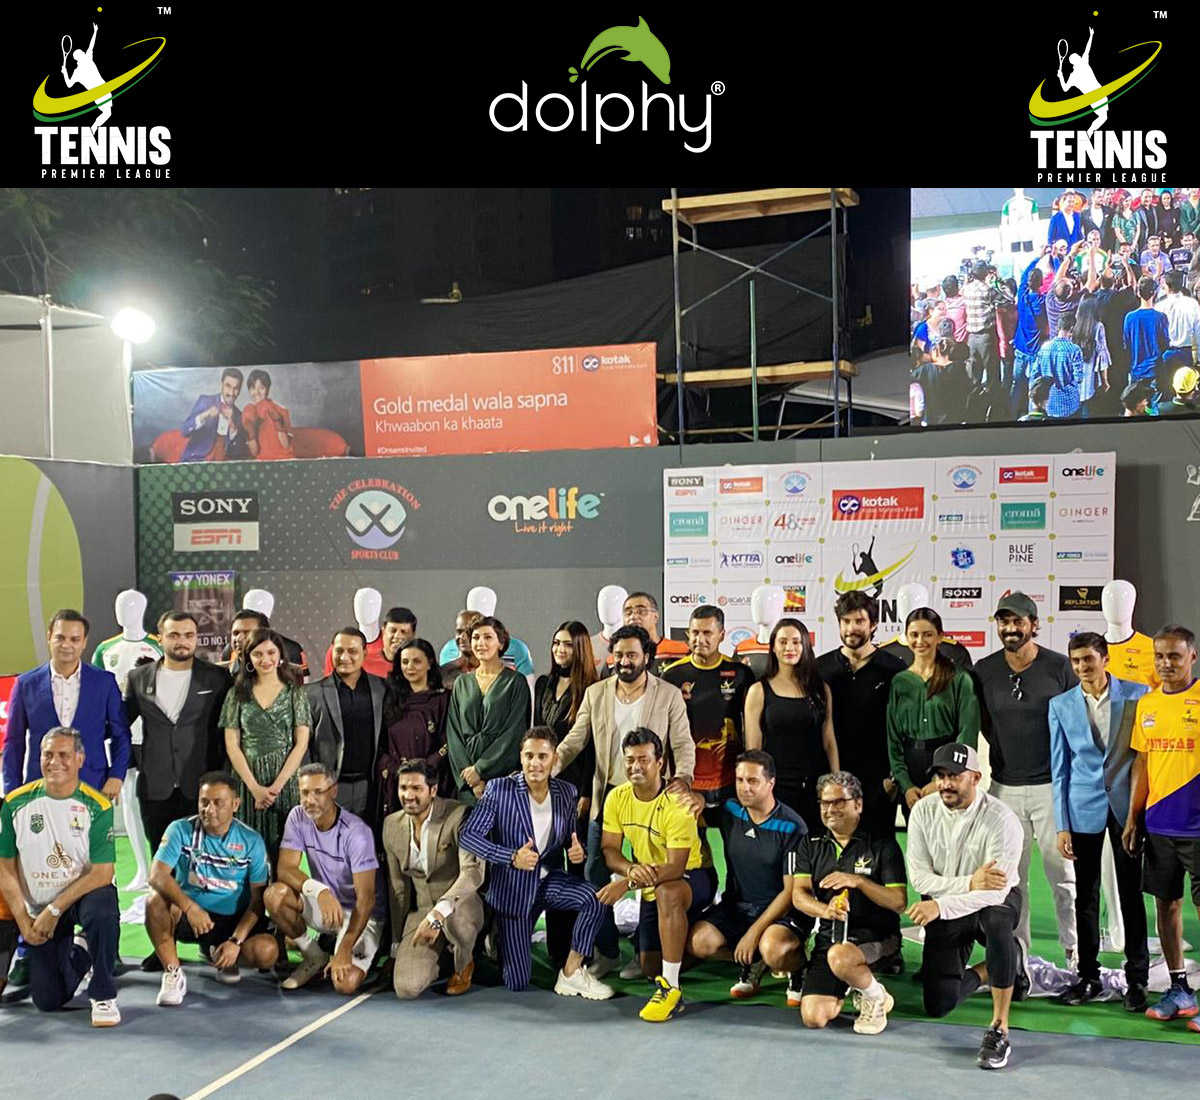 Tennis Premier League-2019 sponsored by dolphy